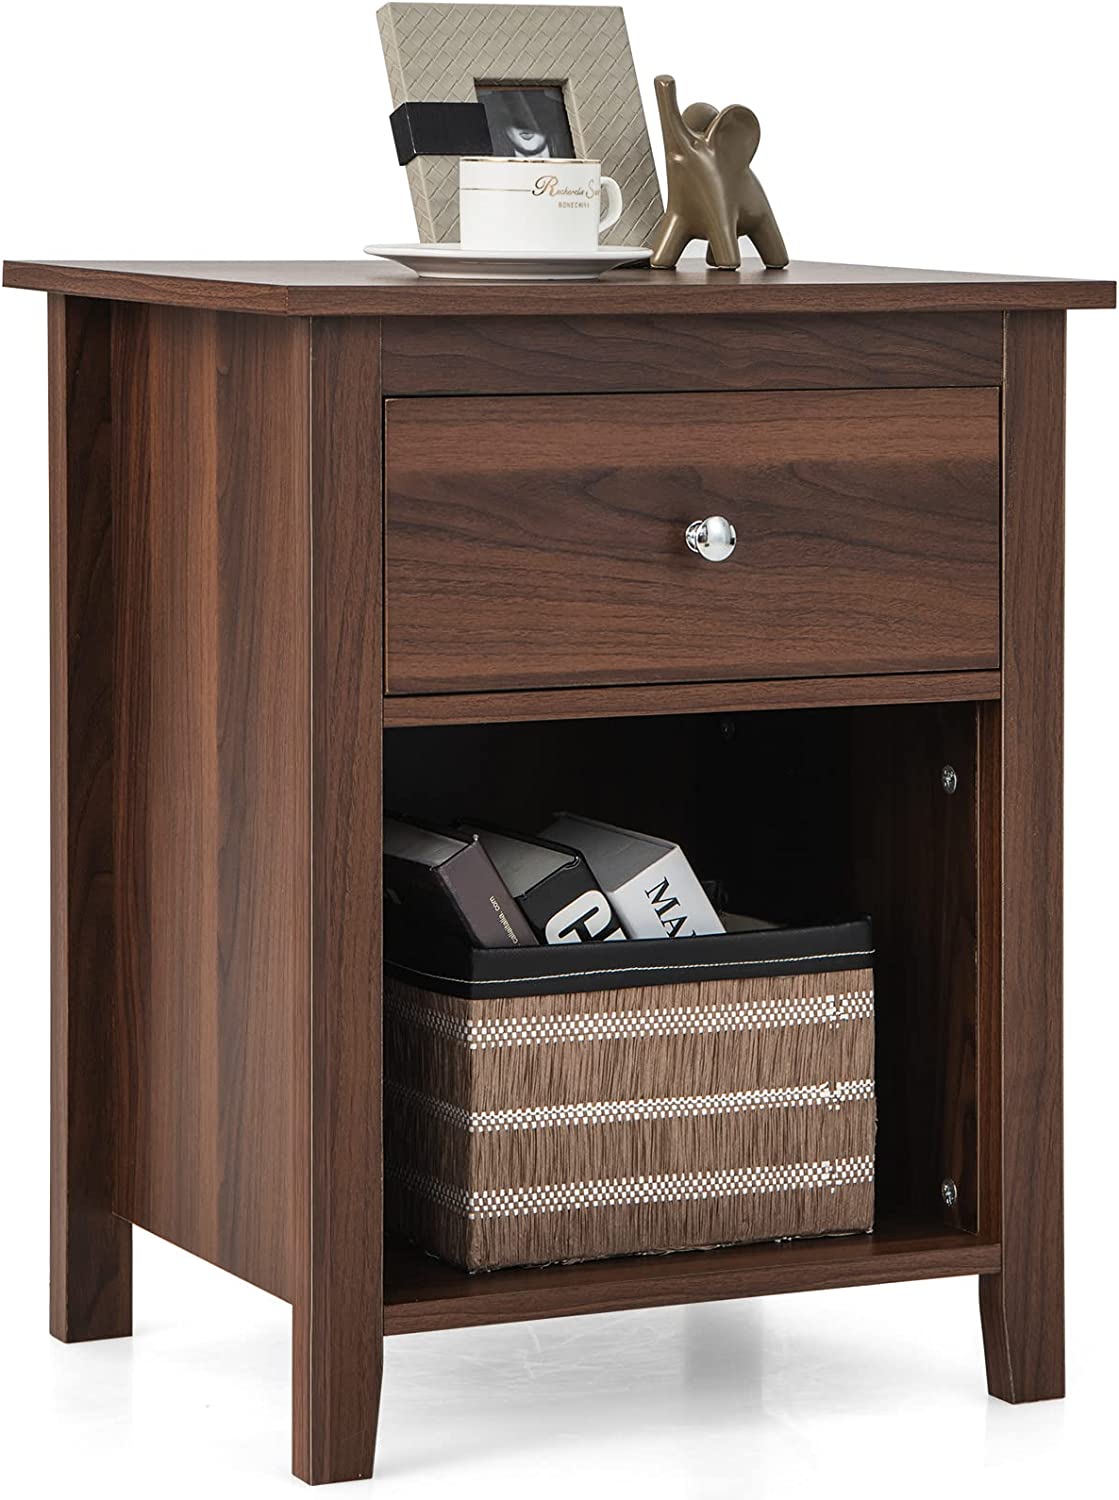 Giantex Nightstand with Storage Drawers and Open Shelf, Rustic Vintage Bedside Table